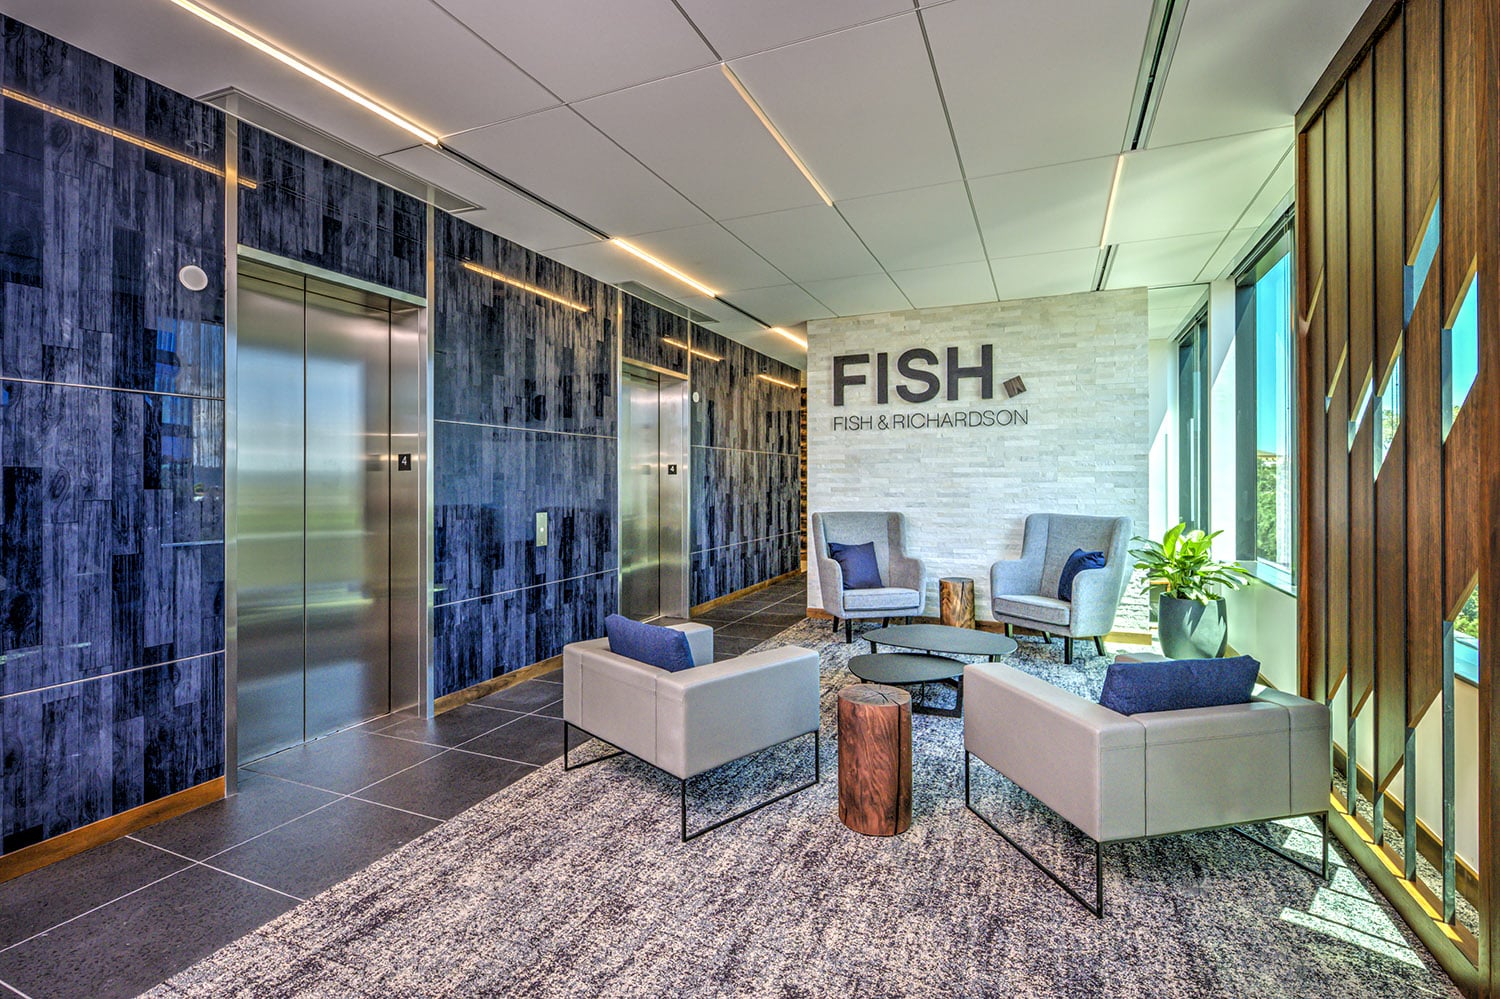 Fish & Richardson design by ID Studios, photo by Pink Media